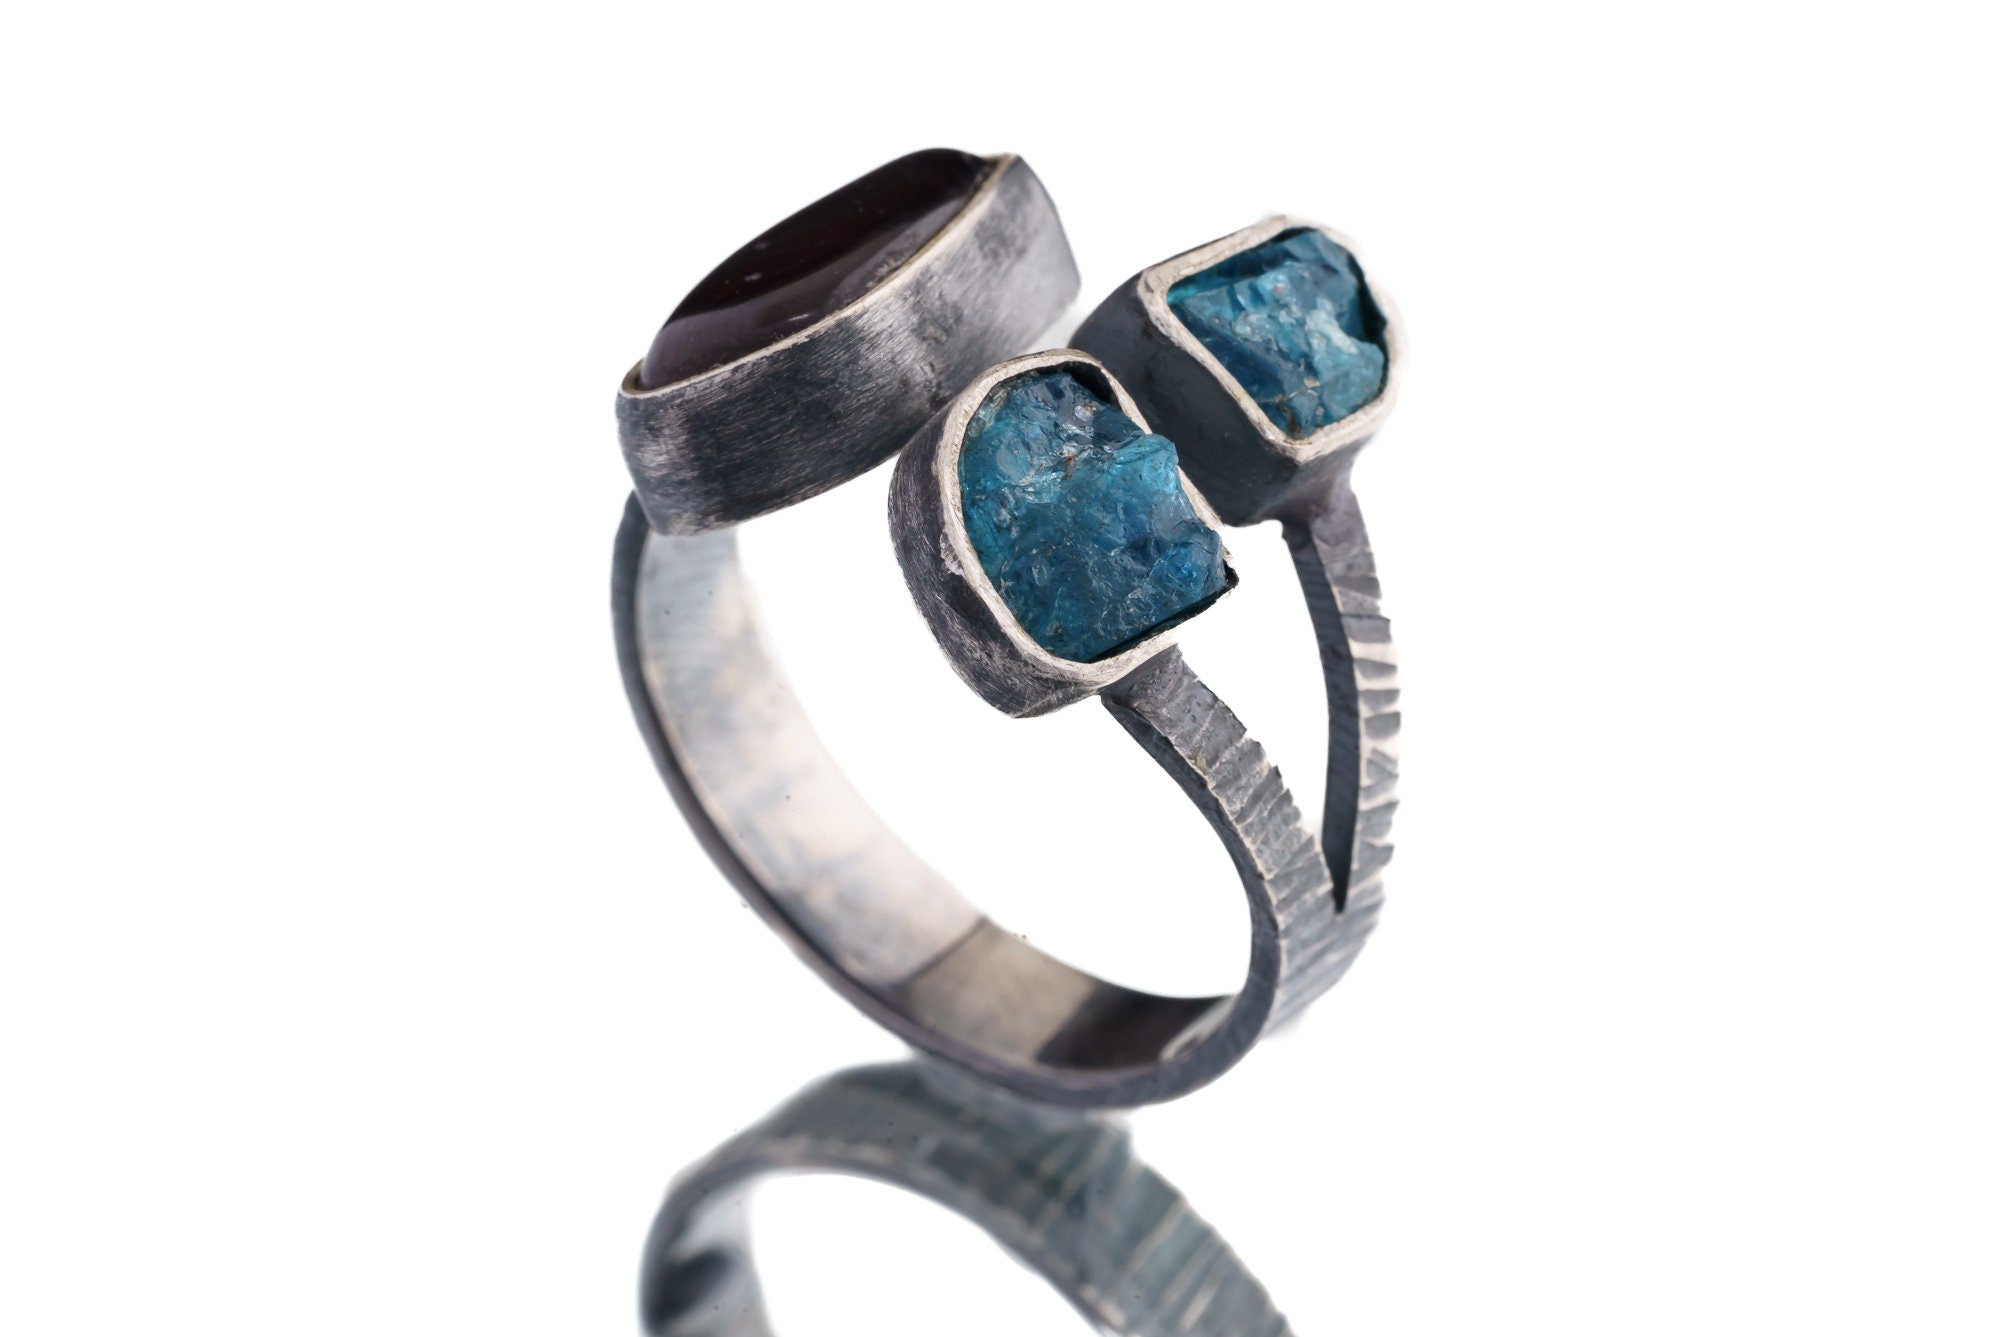 Ammolite Fossil & Apatite - 925 Sterling Silver - Multi Stone - Textured, Oxidised - Open Ring Band - Adjustable US 6 - 10 - NO/14